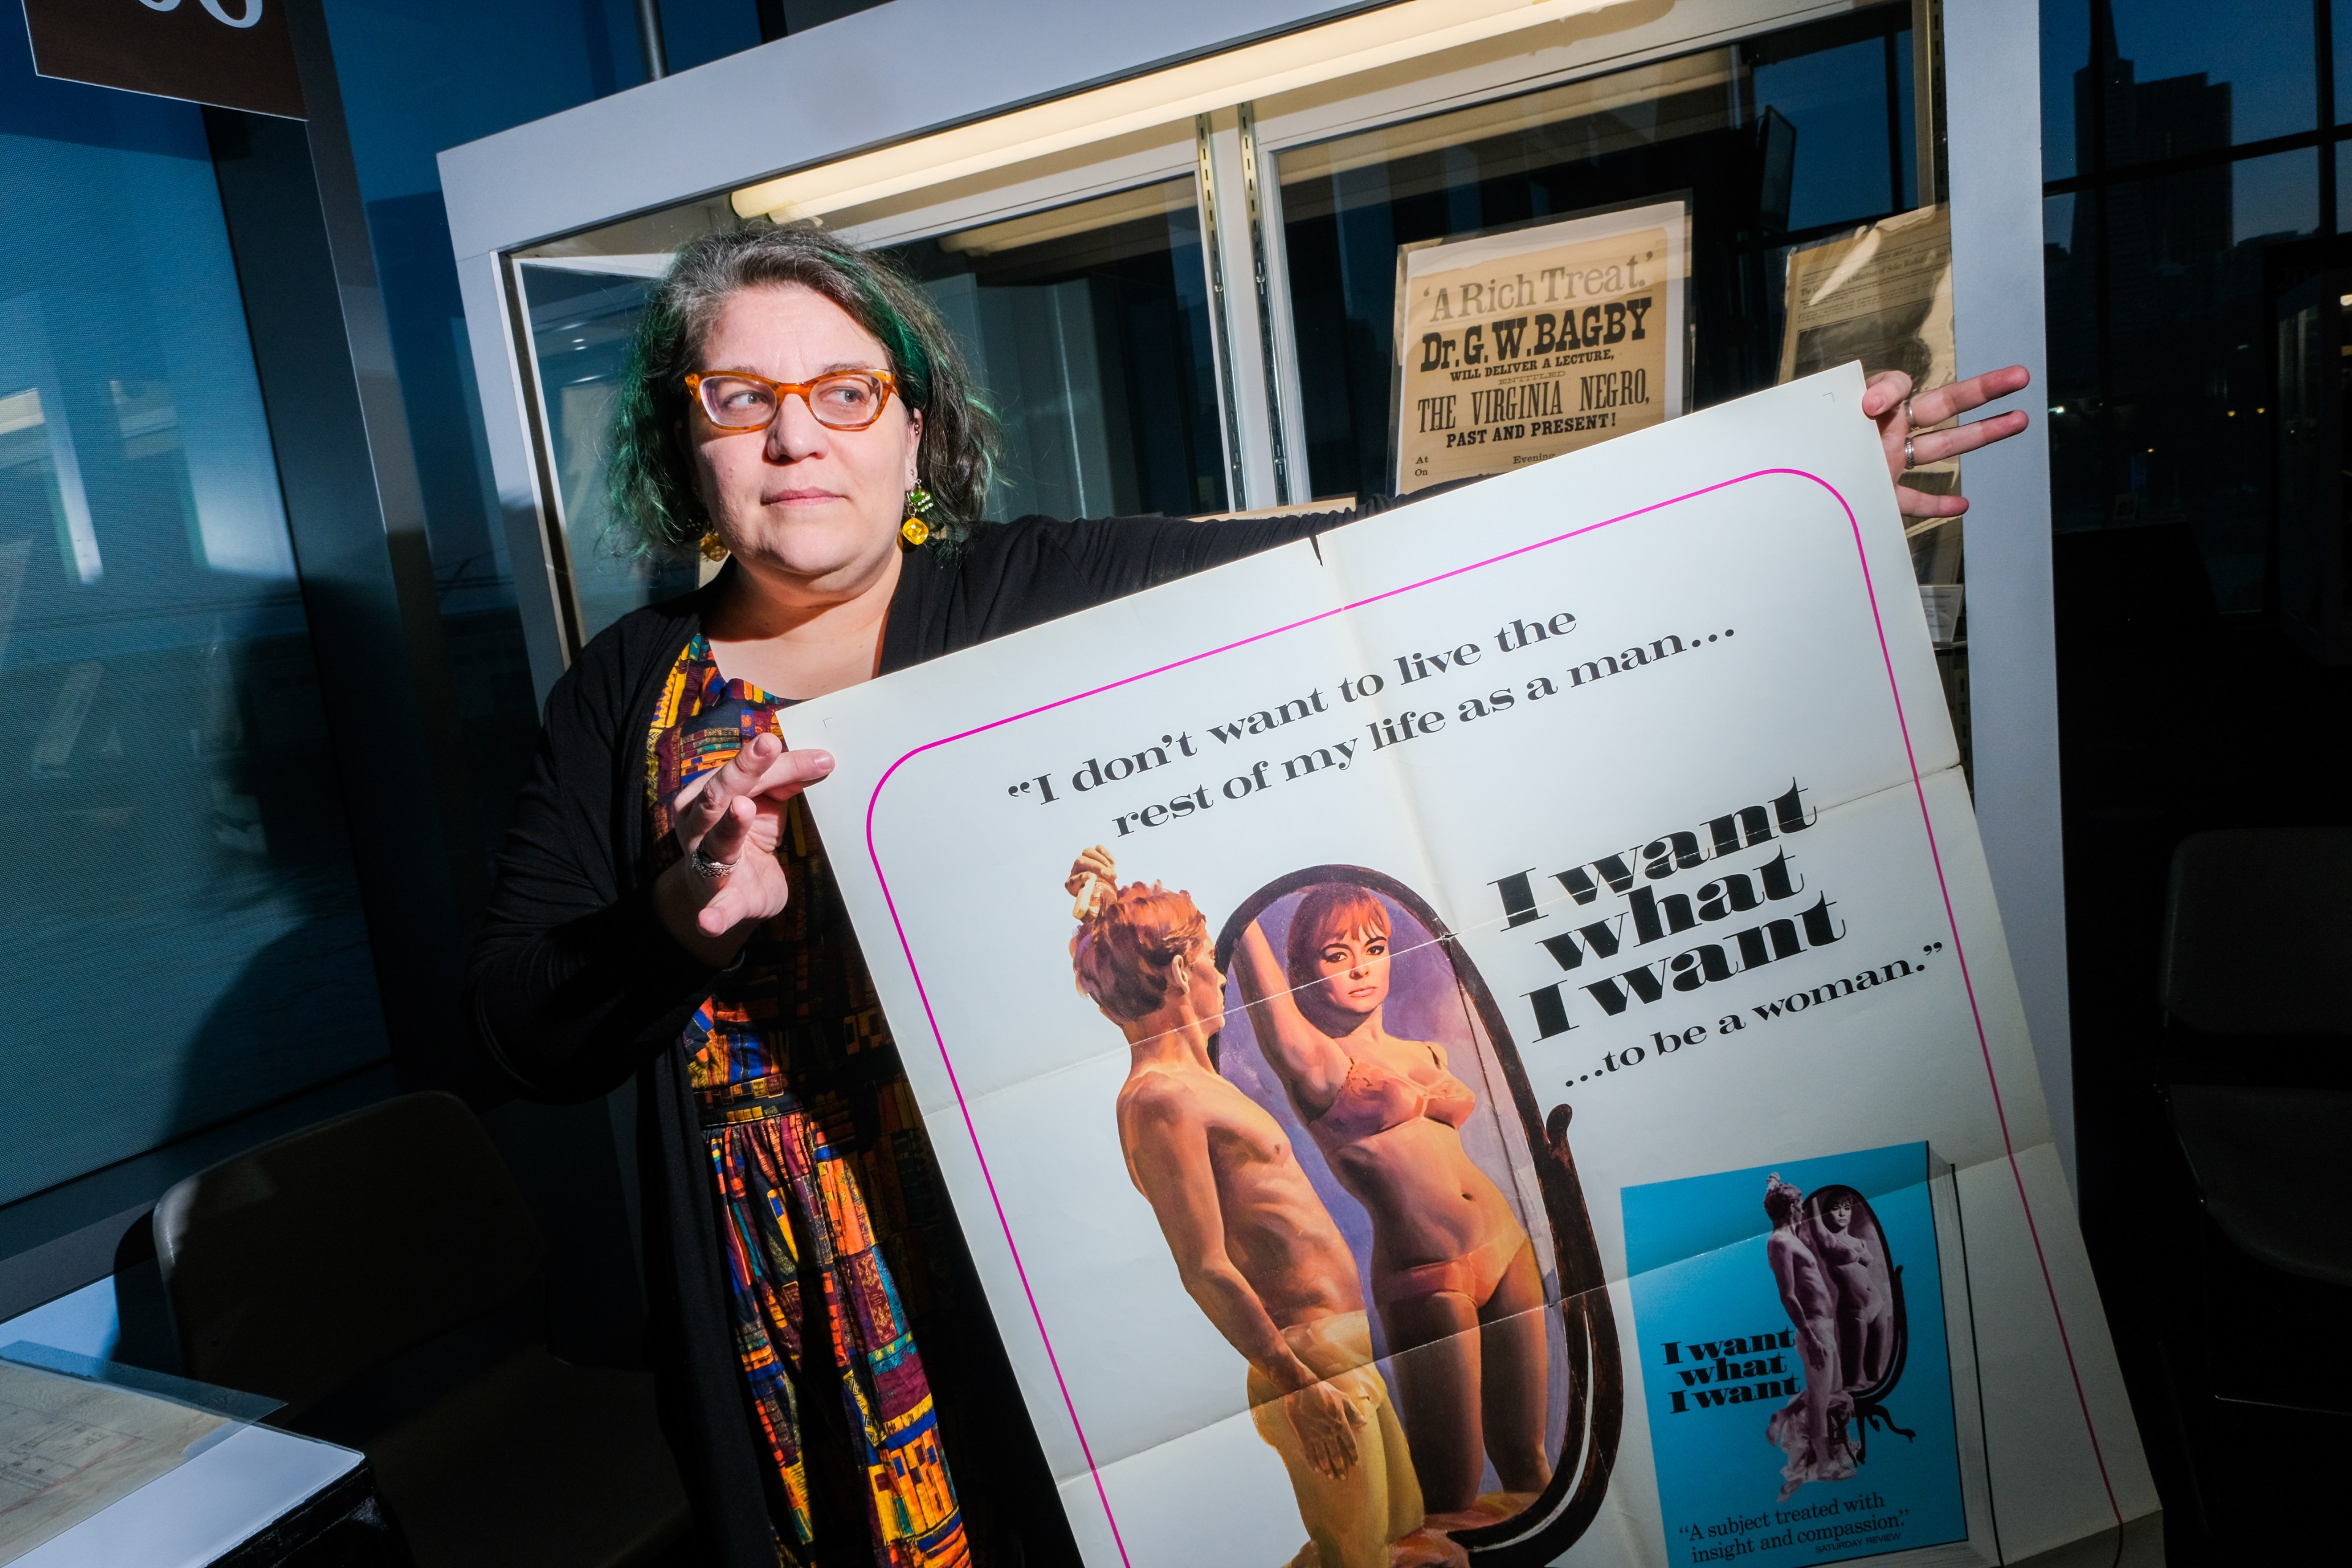 A person holds a large poster with text and an illustration of a nude figure transitioning genders. The poster has a feminist message.